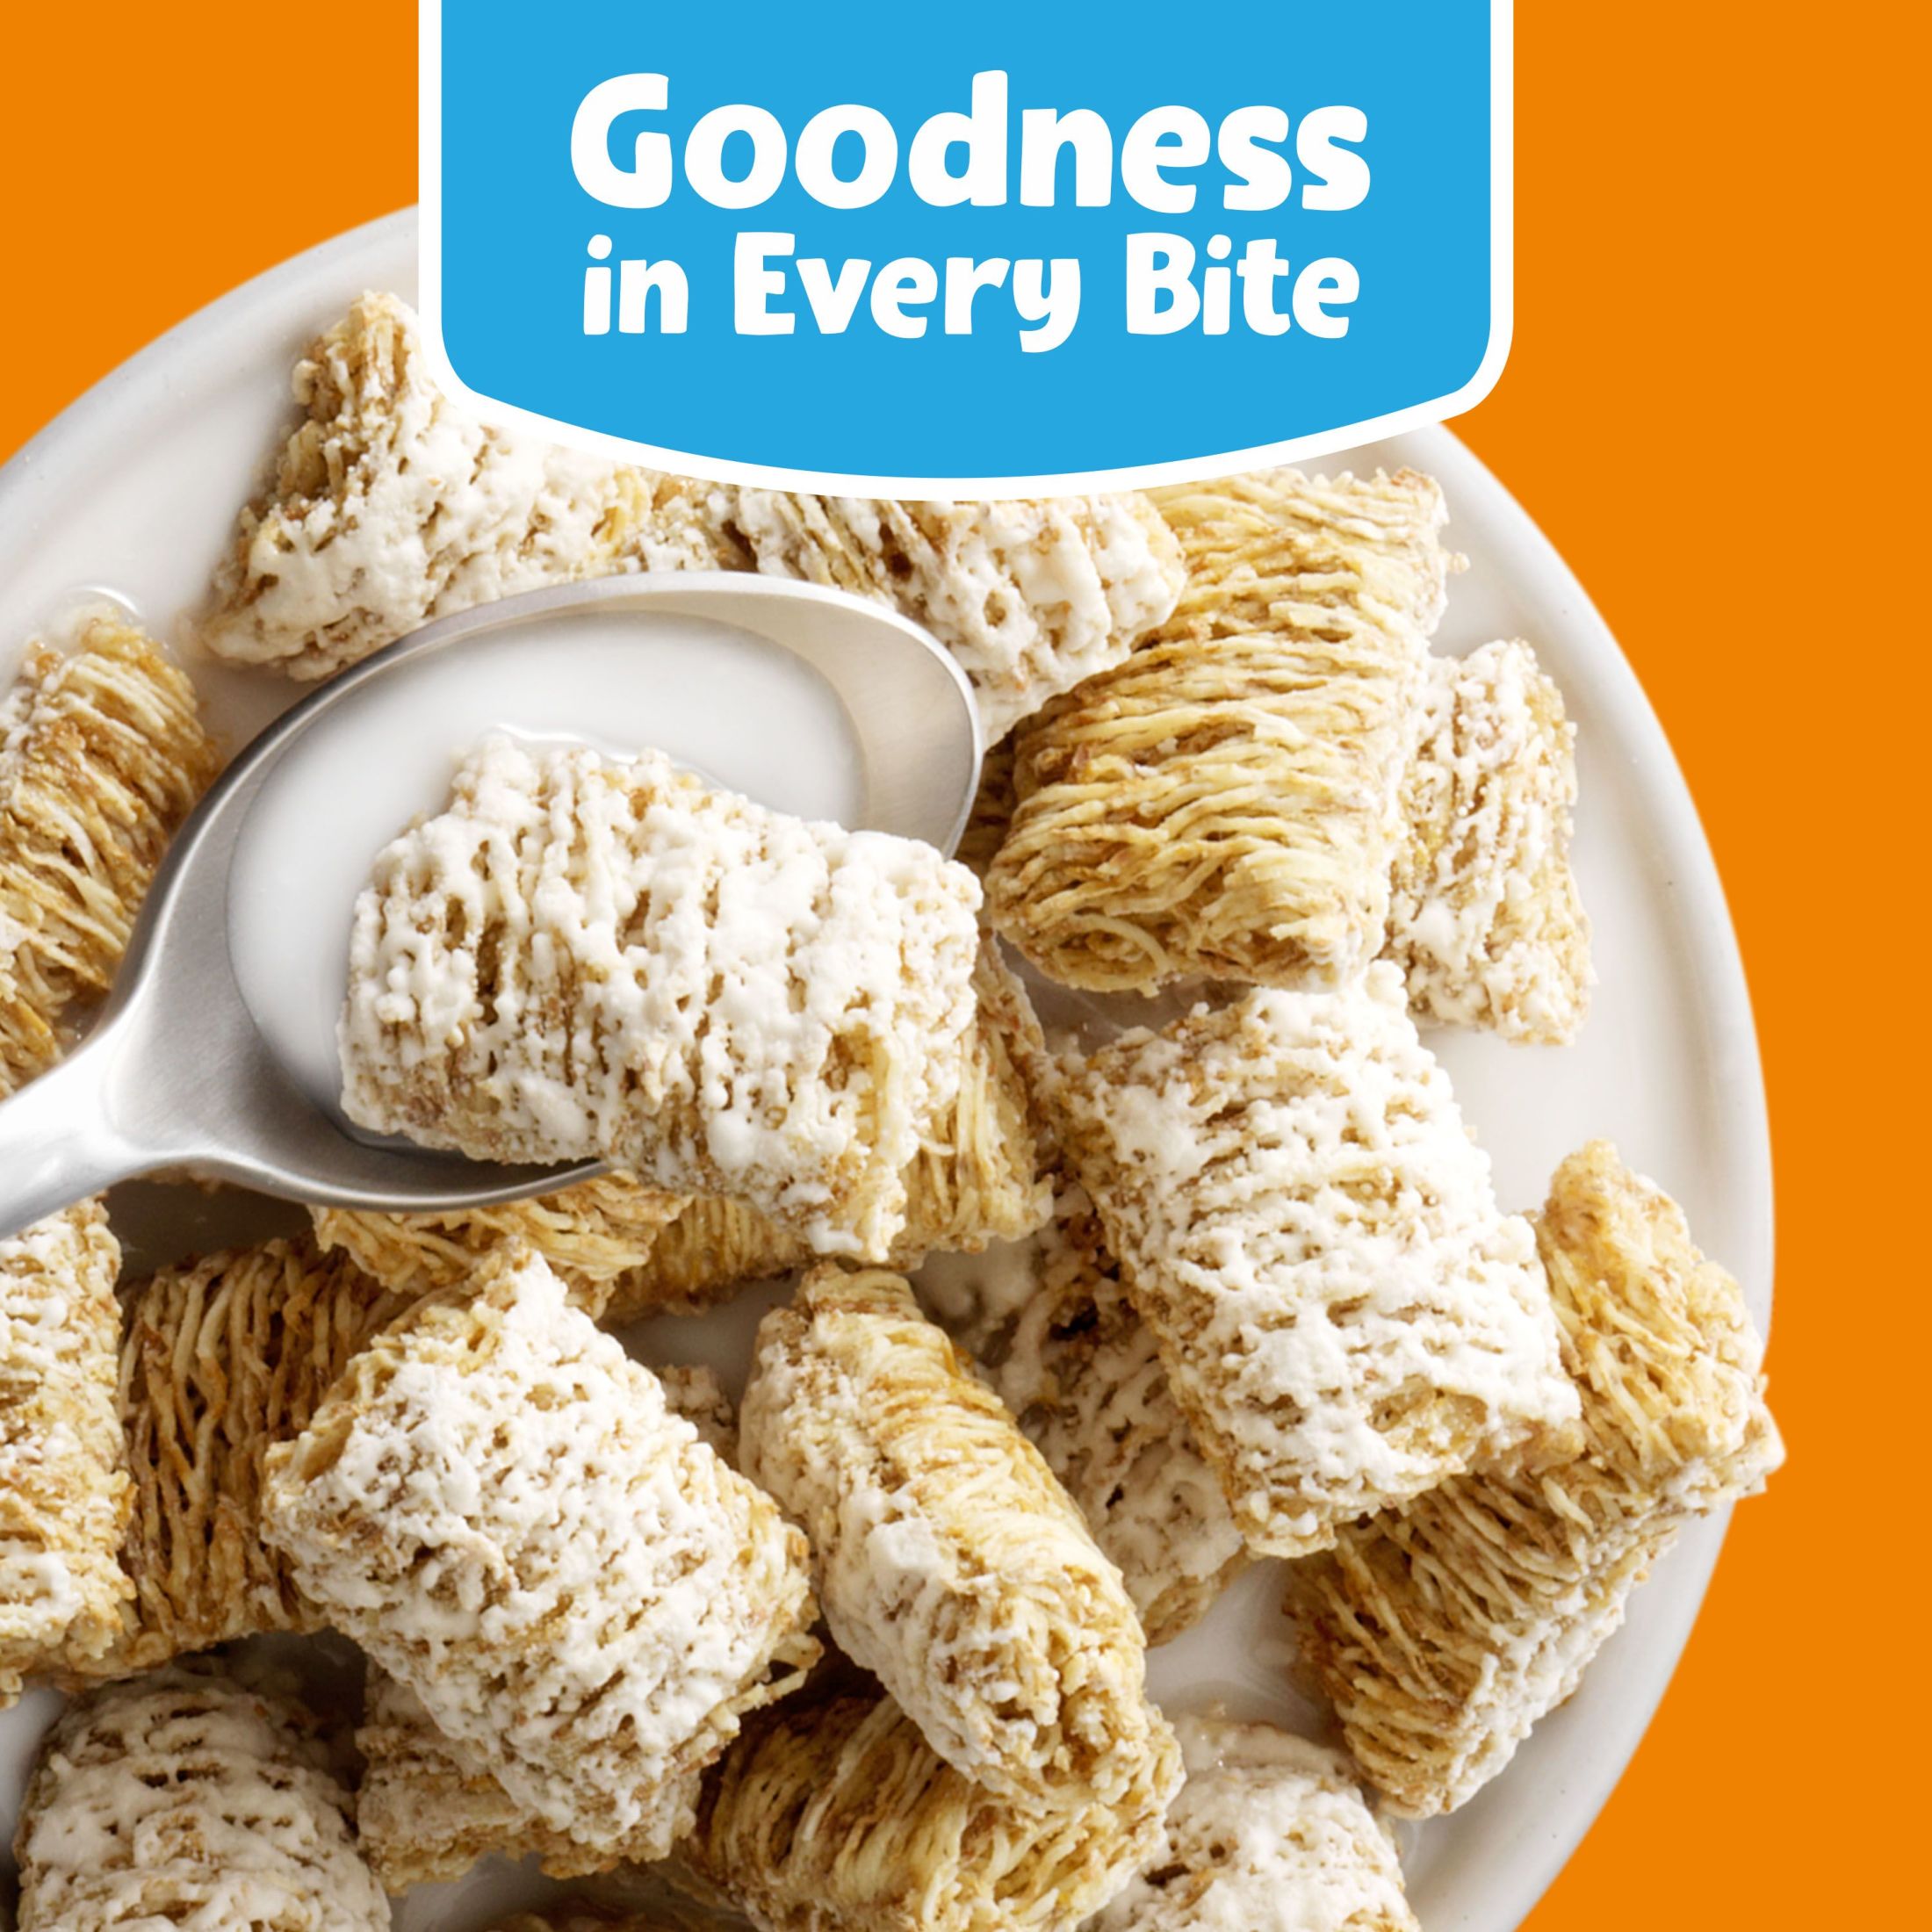 Kellogg's Frosted Mini-Wheats Original Breakfast Cereal, Family Size, 24 oz Box - image 4 of 13